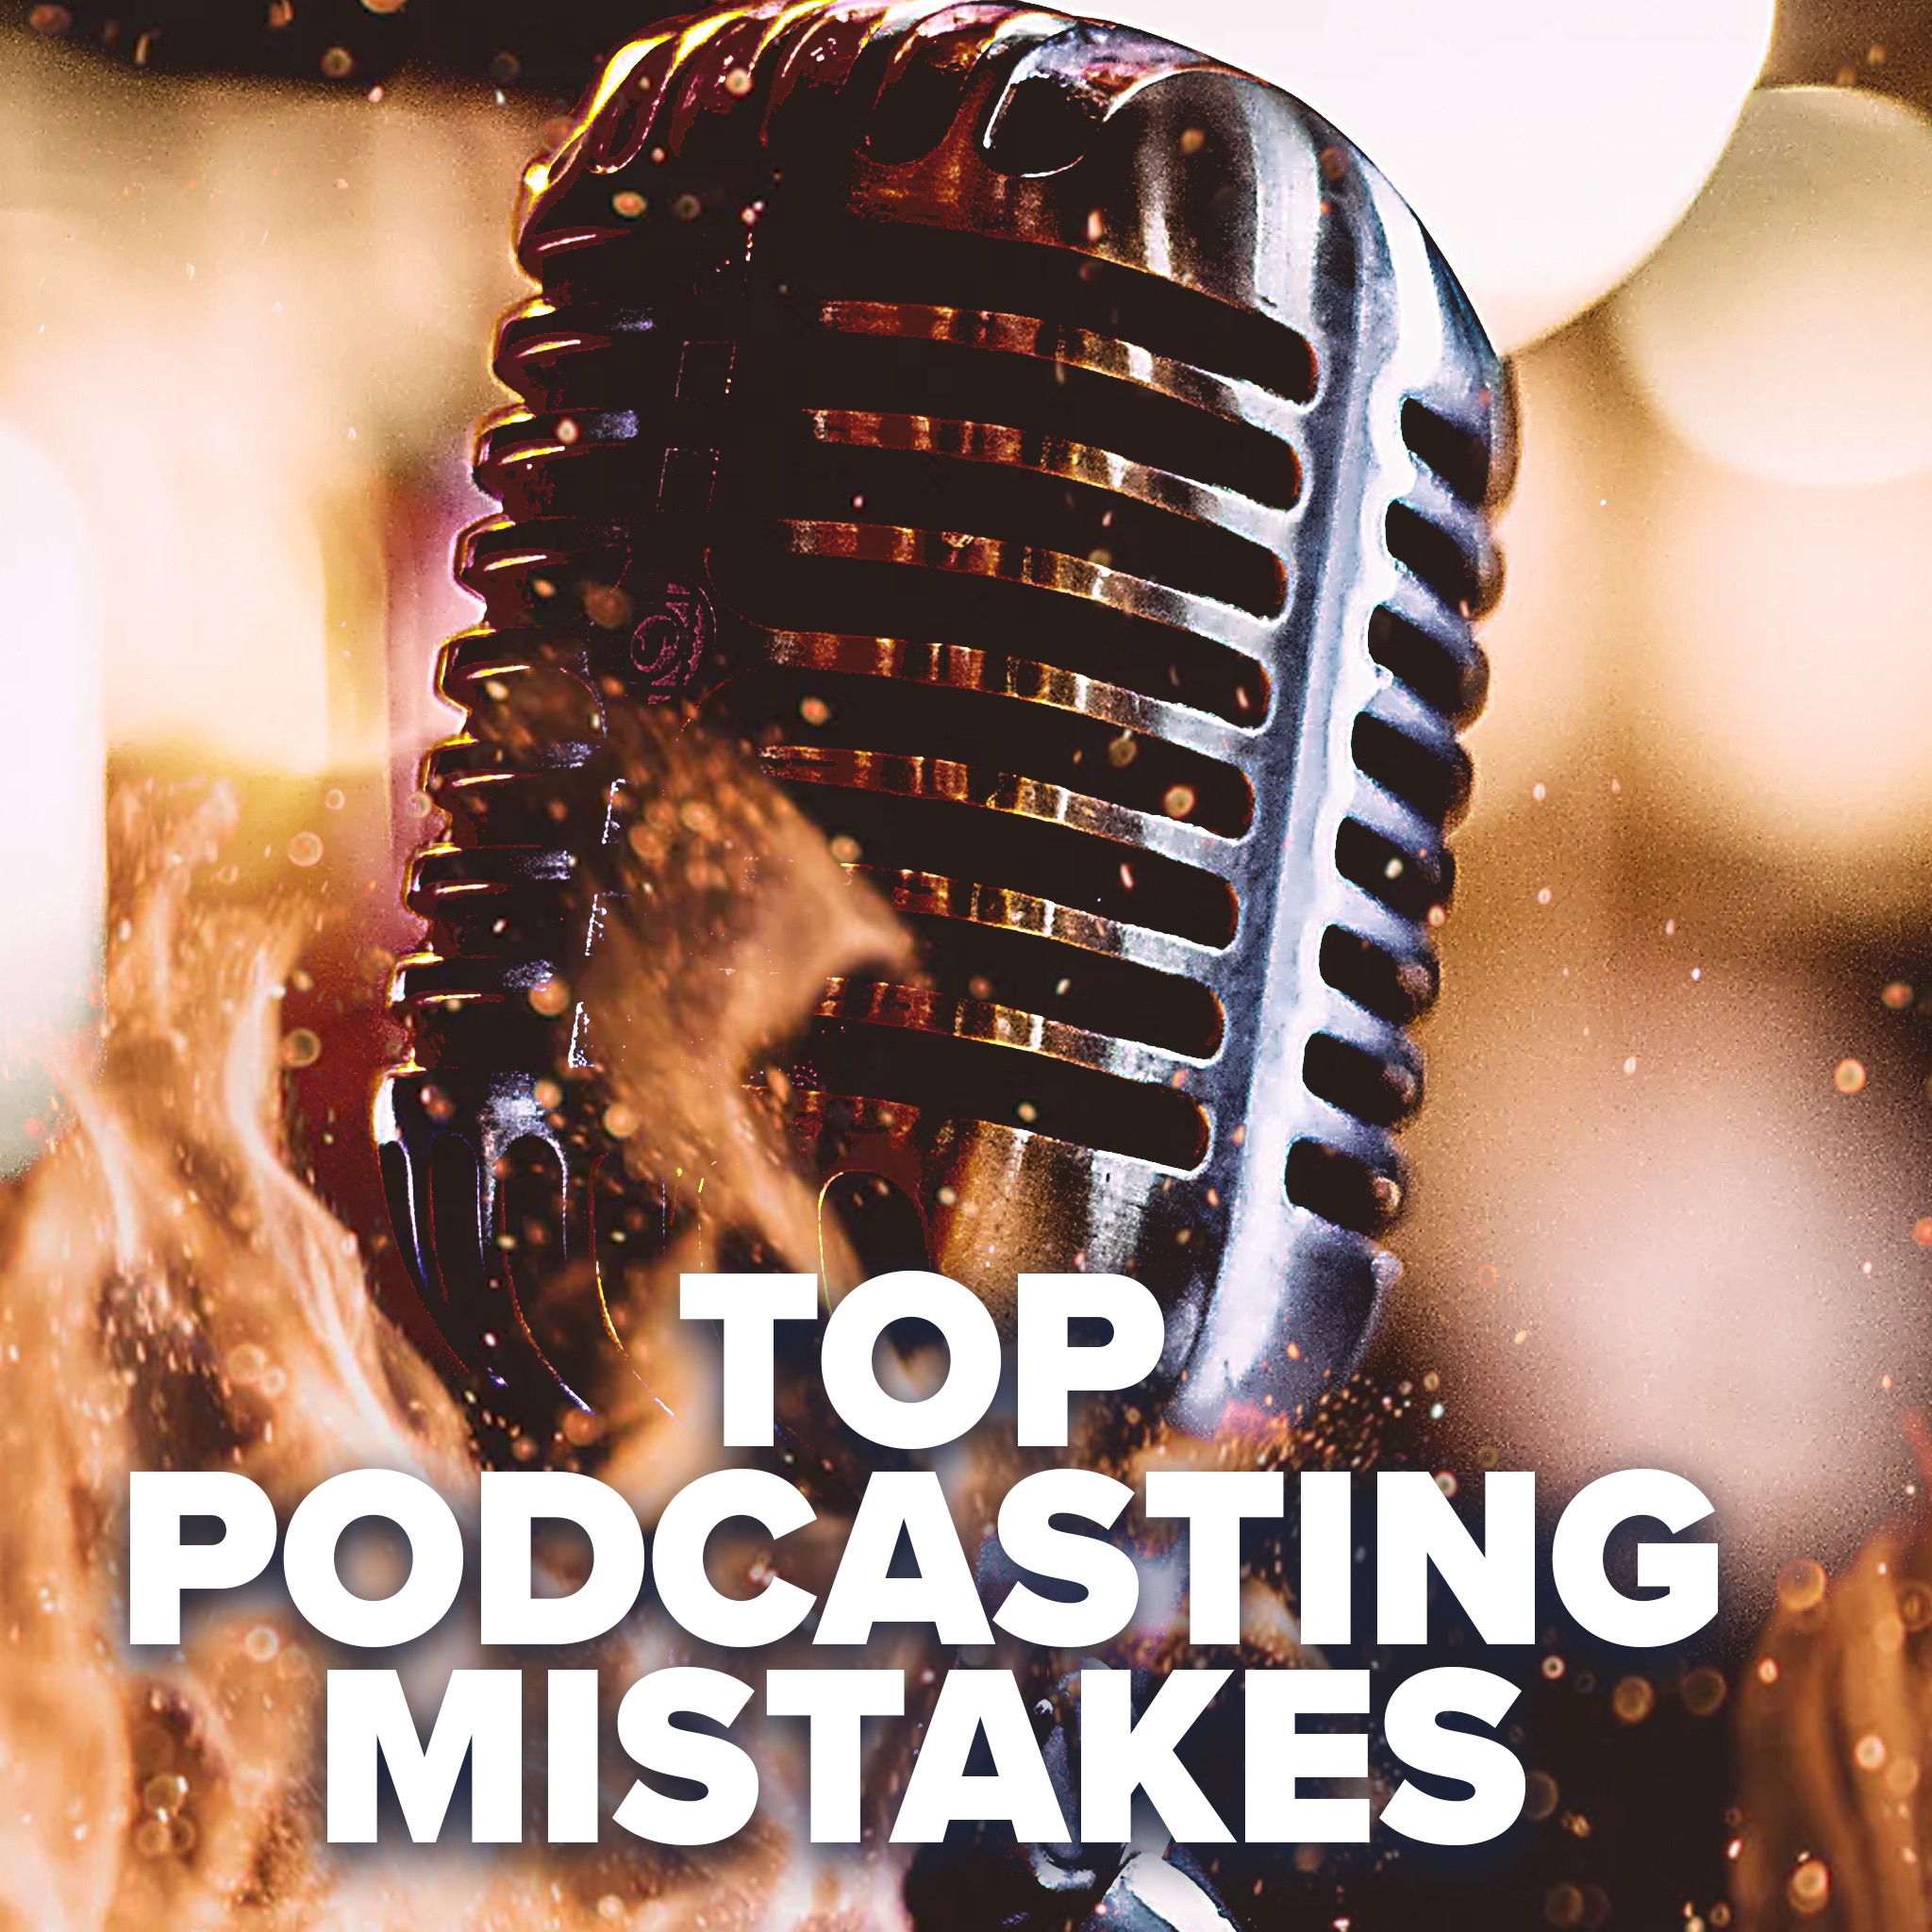 Top Podcasting Mistakes